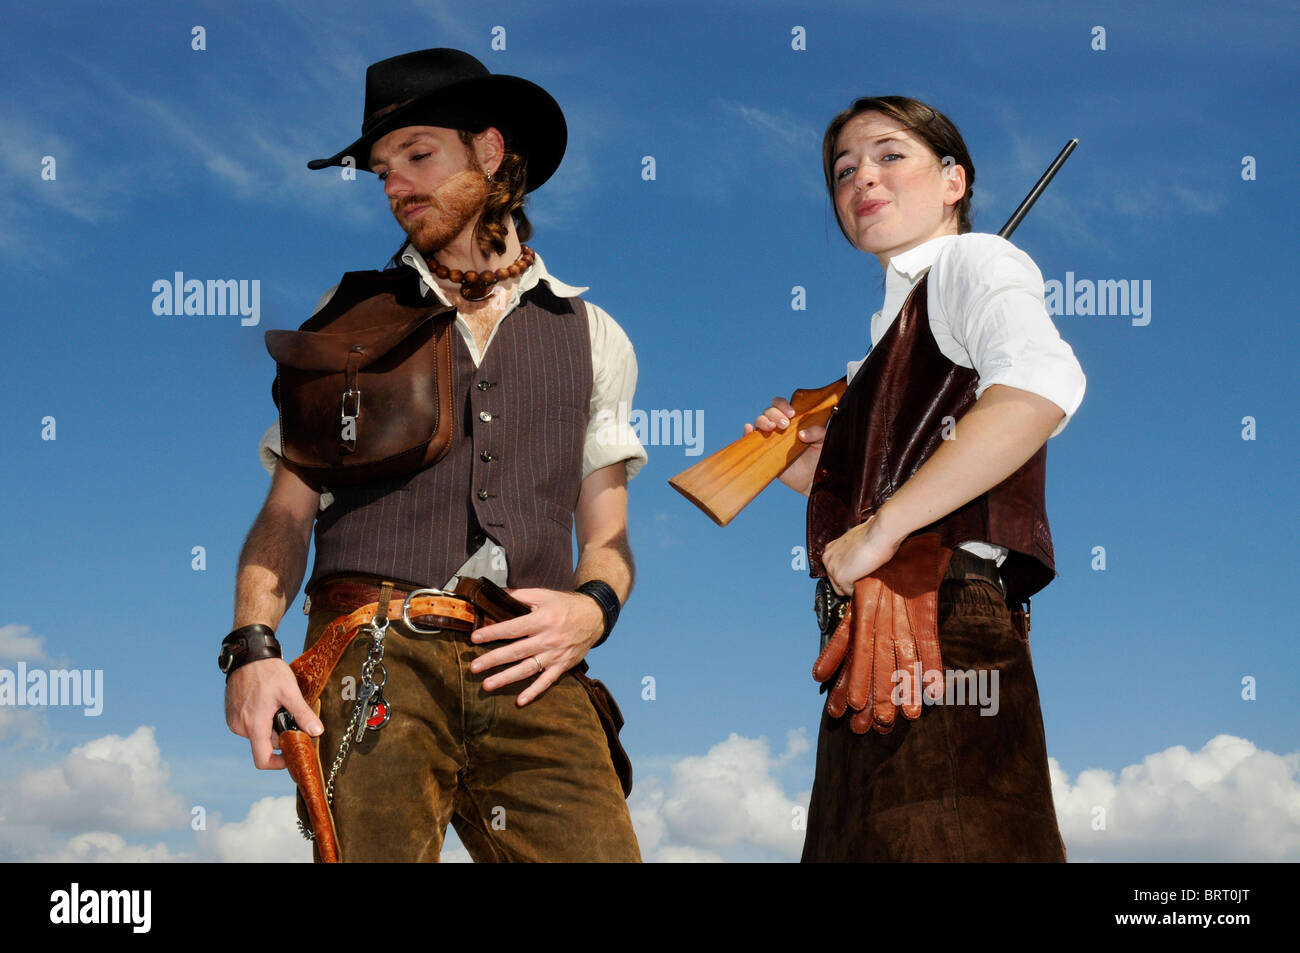 Cowboy and cowgirl Stock Photo